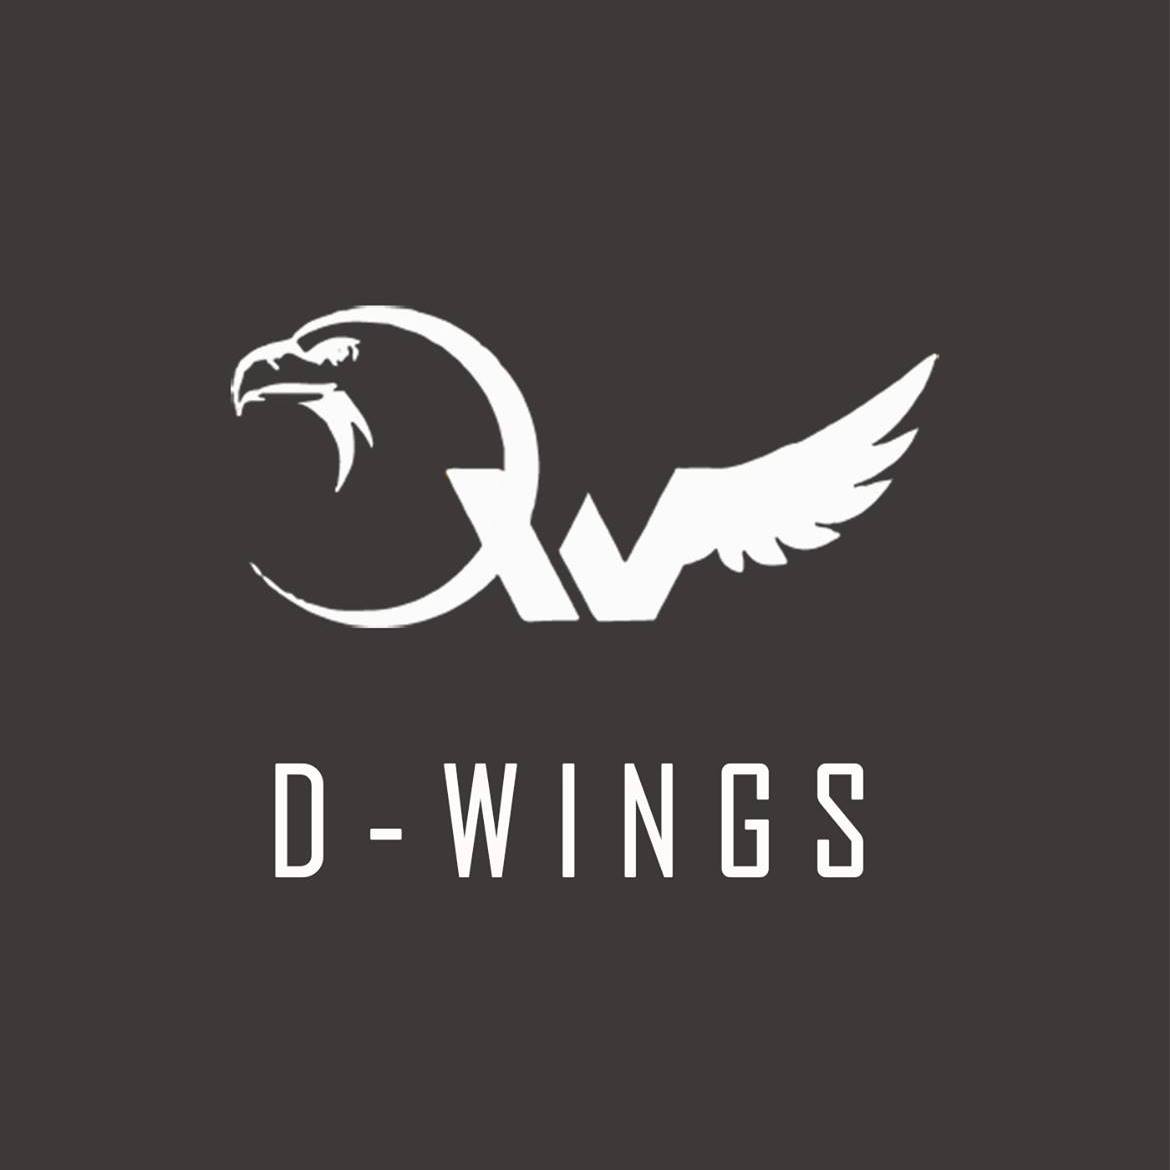 Design Wings|Architect|Professional Services